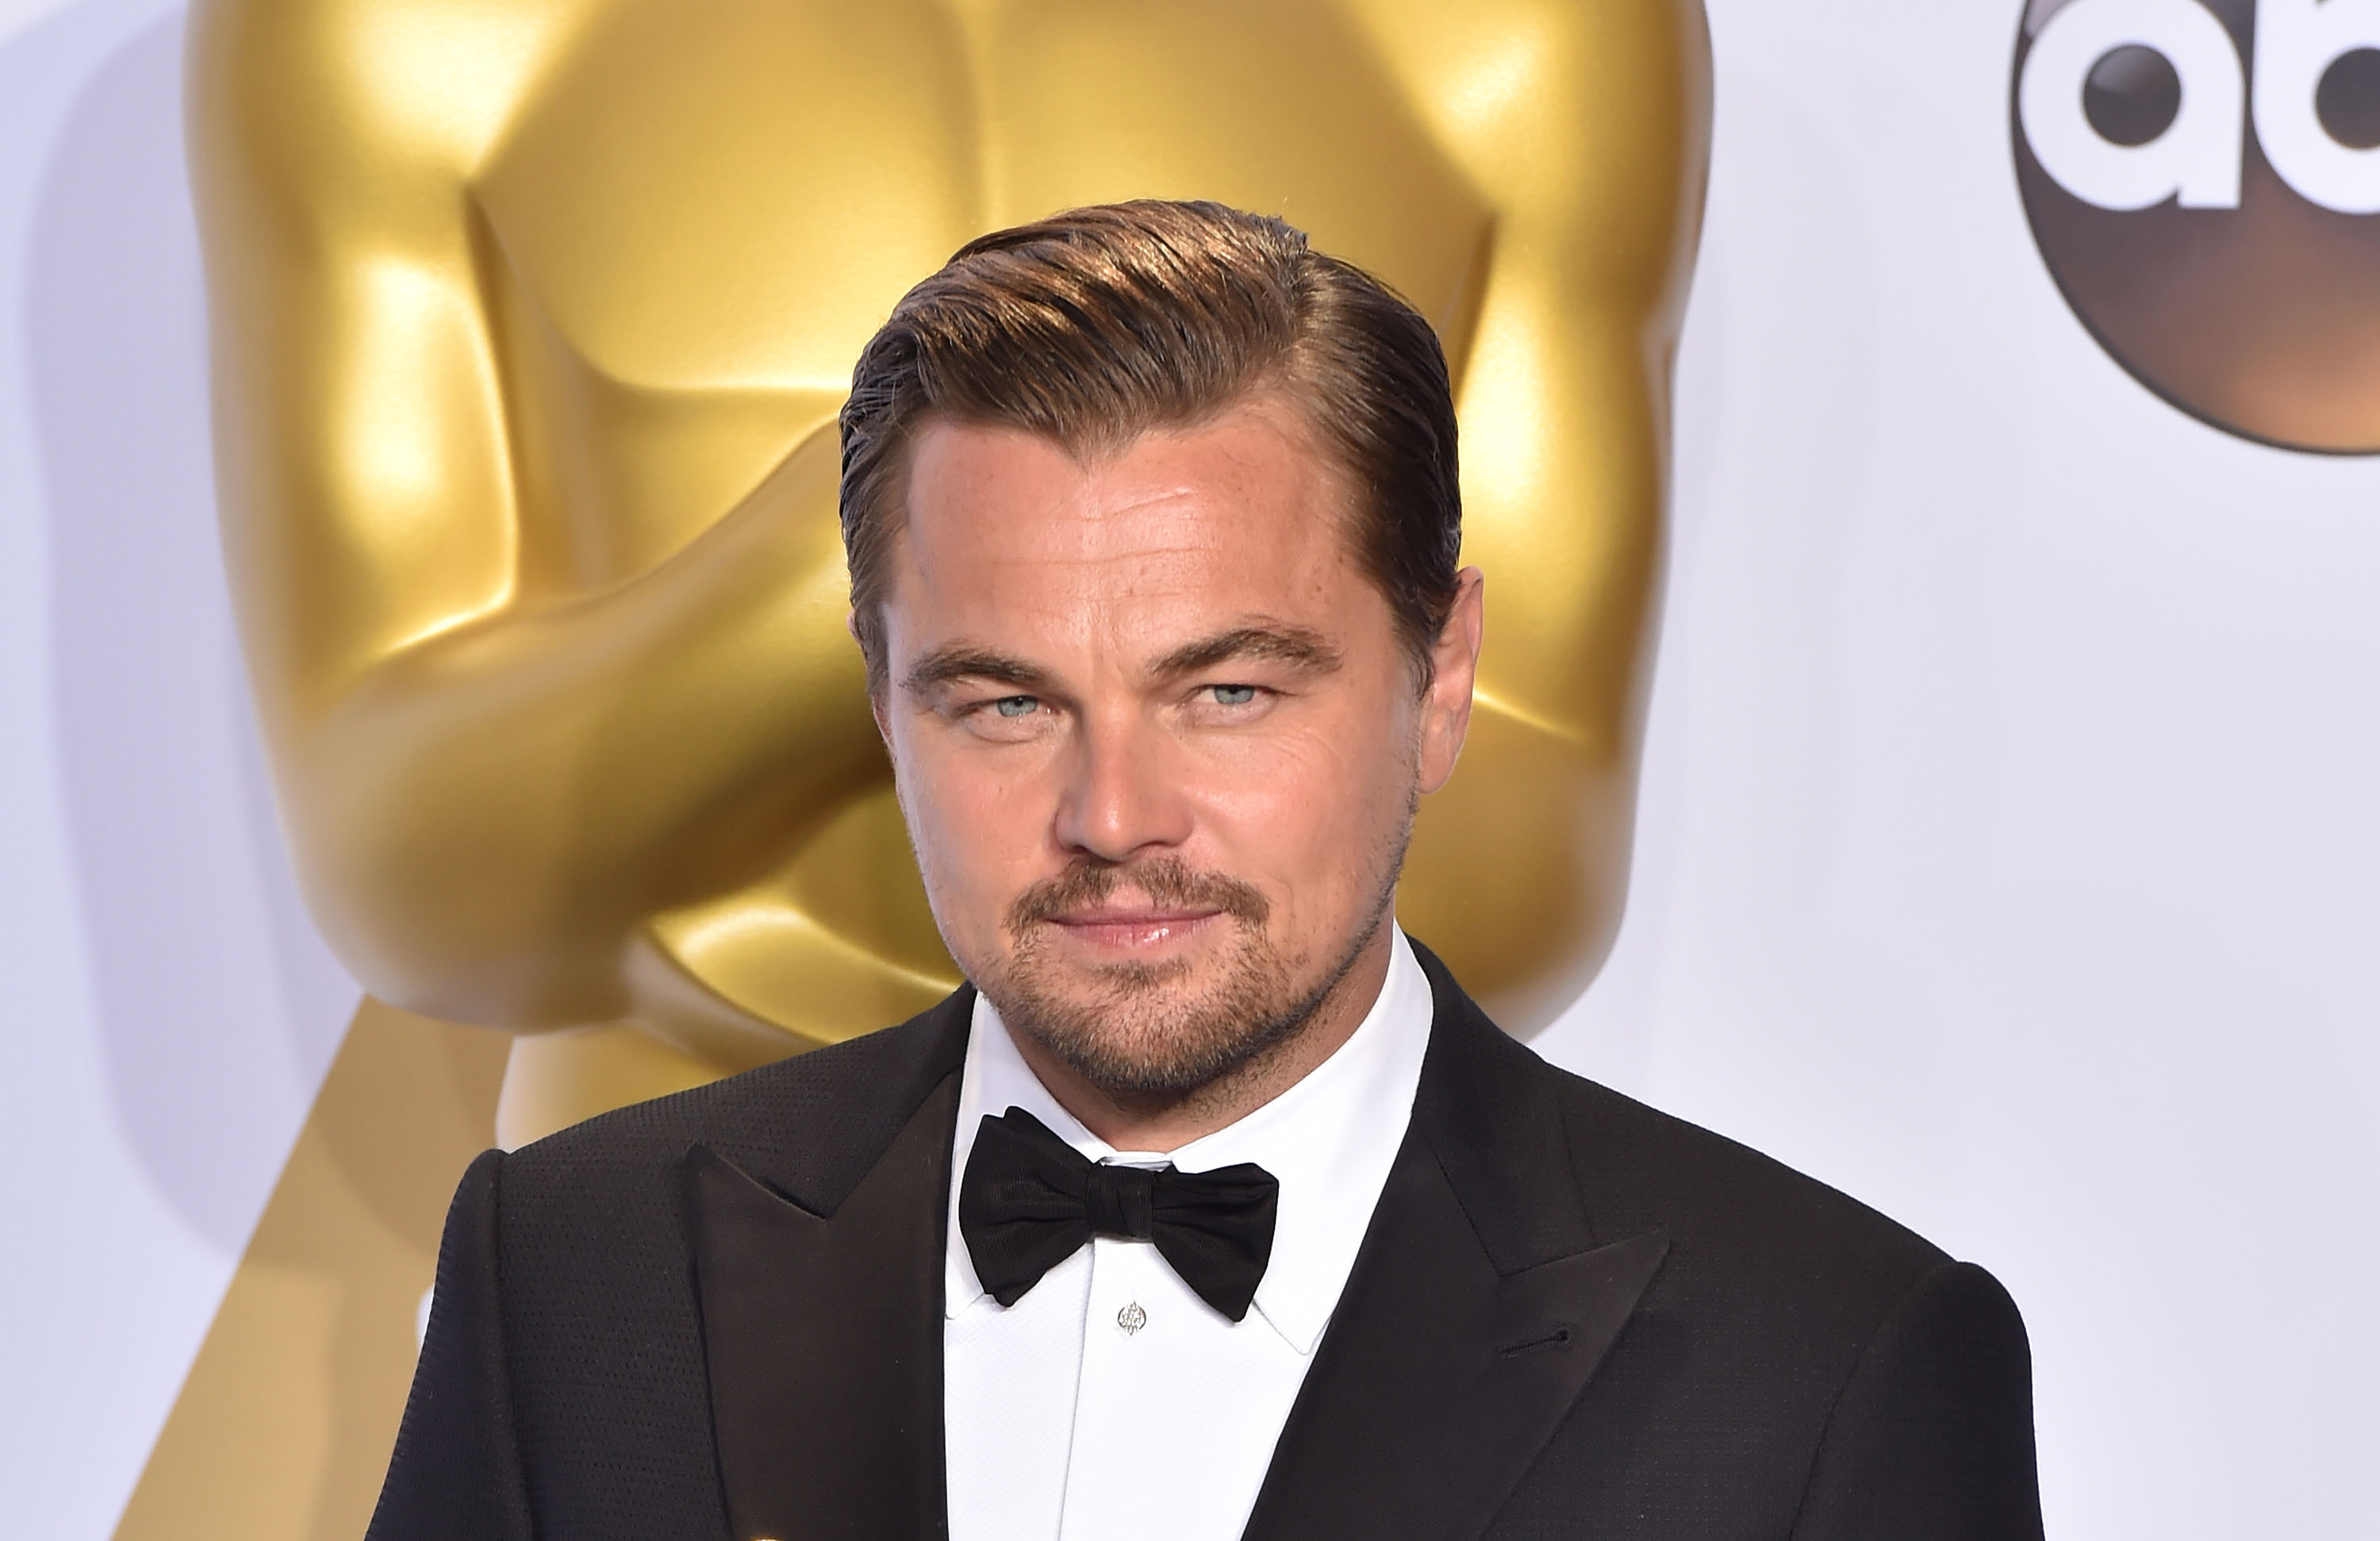 Actor Leonardo DiCaprio, winner of the award for Best Actor in a Leading Role for 'The Revenant,' poses in the press room during the 88th Annual Academy Awards on Feb. 28, 2016 in Hollywood, Calif. (C Flanigan—FilmMagic/Getty Images)